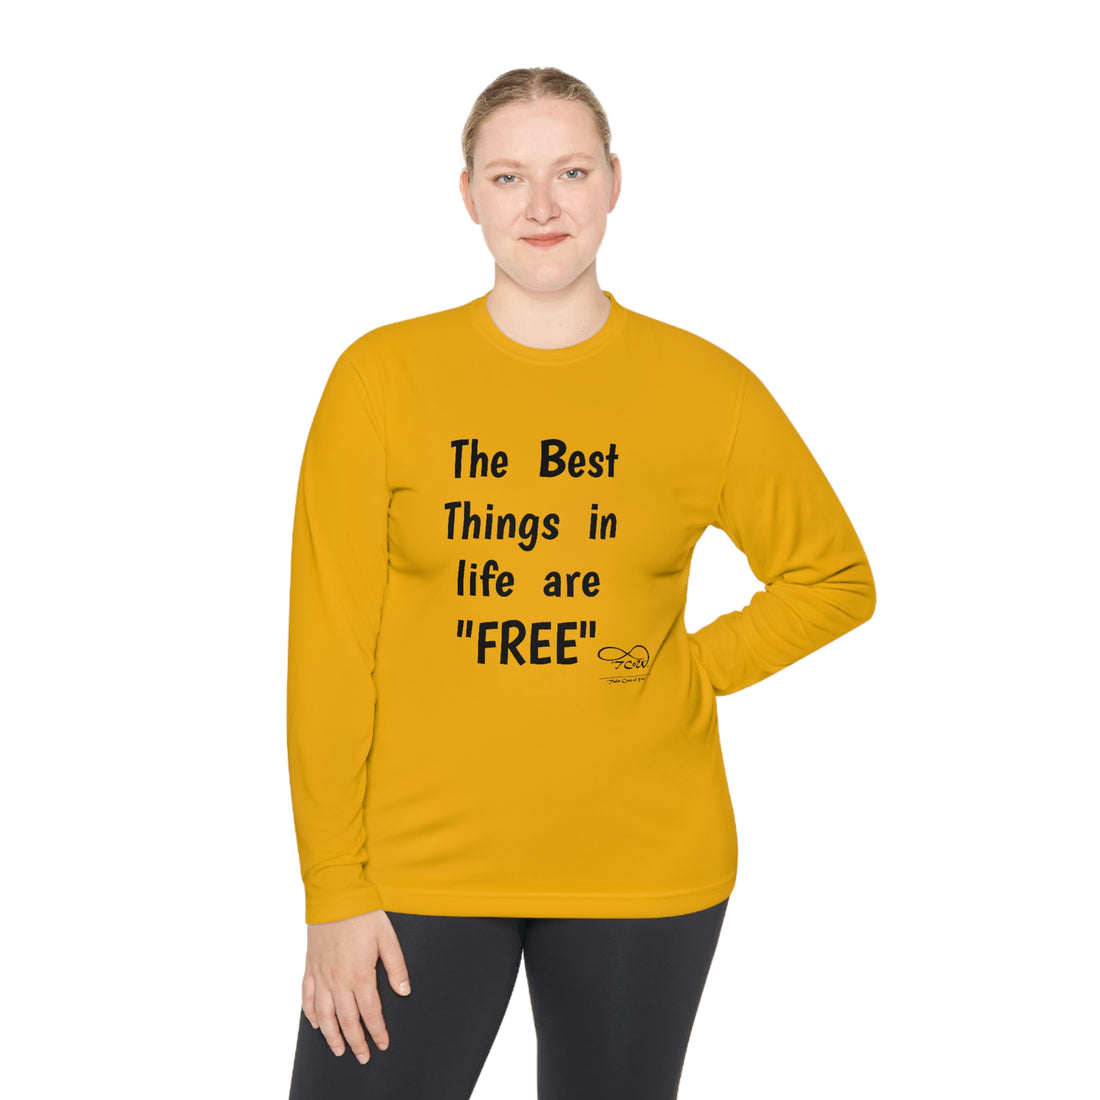 FUN QUOTES -- "Best Things in Life are FREE -- Unless I'm in the Dog-House"--Unisex Lightweight Long Sleeve Tee